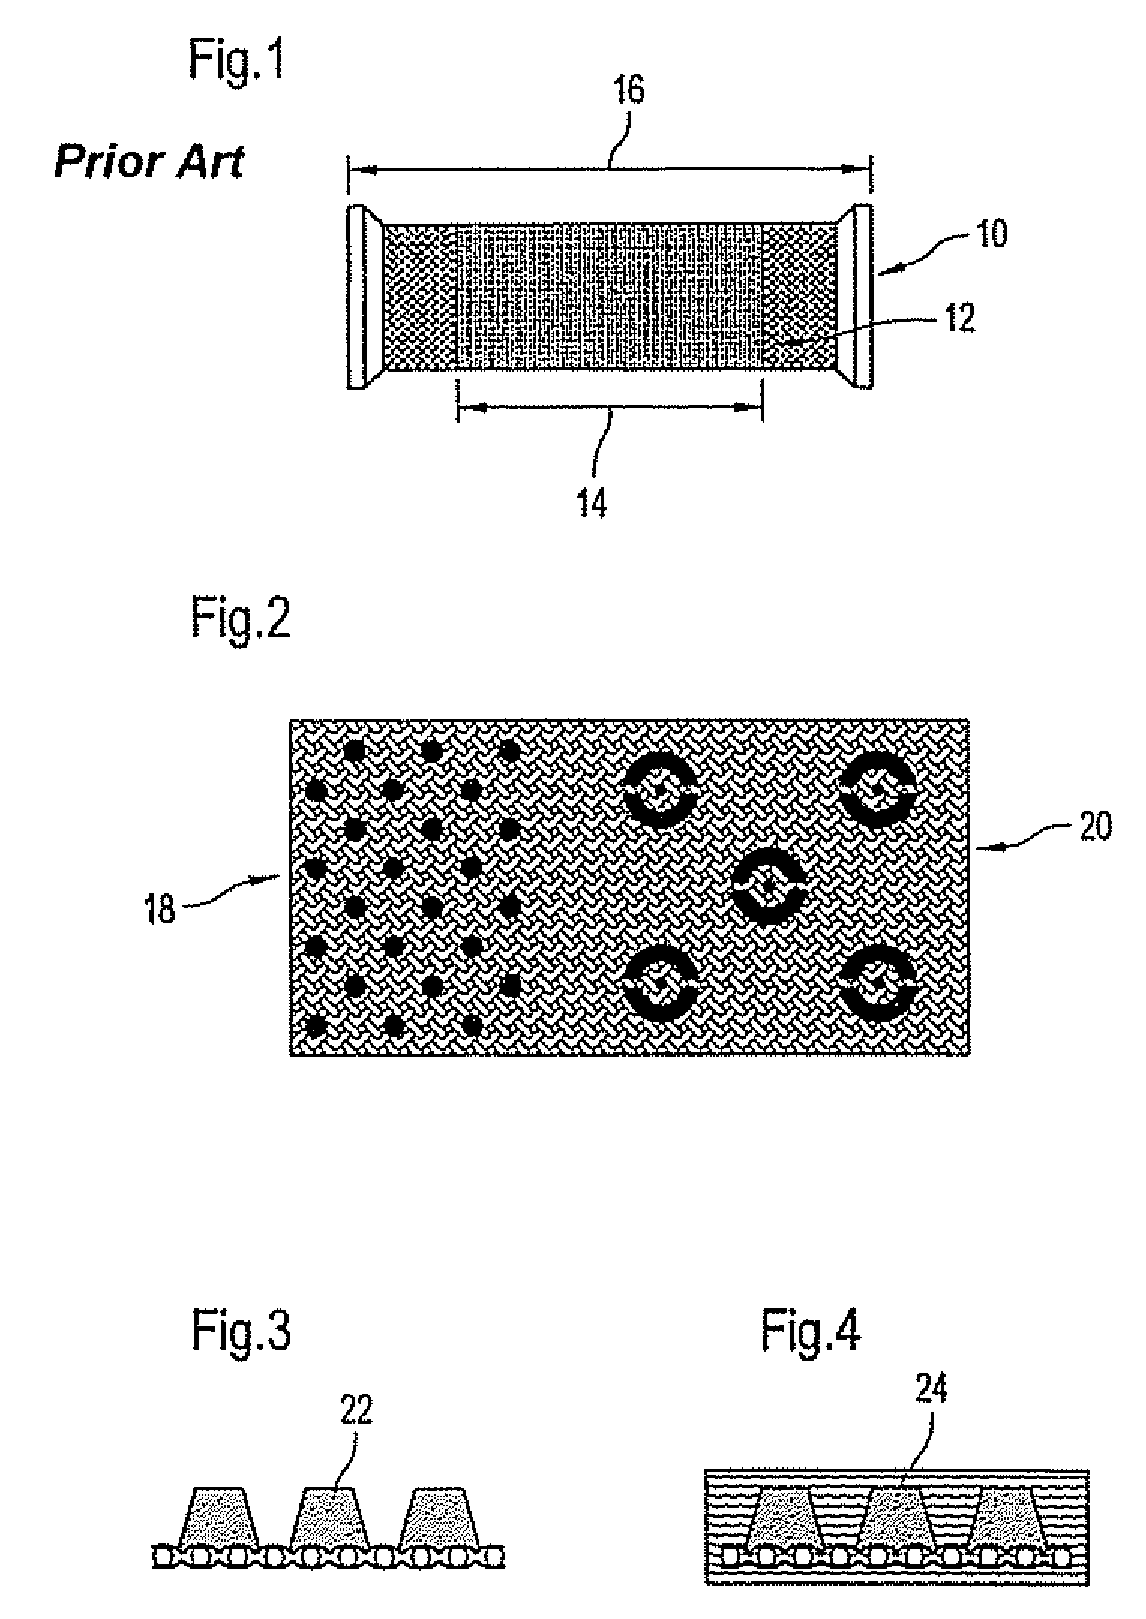 Method for producing topographical pattern on papermachine fabric by rotary screen printing of polymeric material